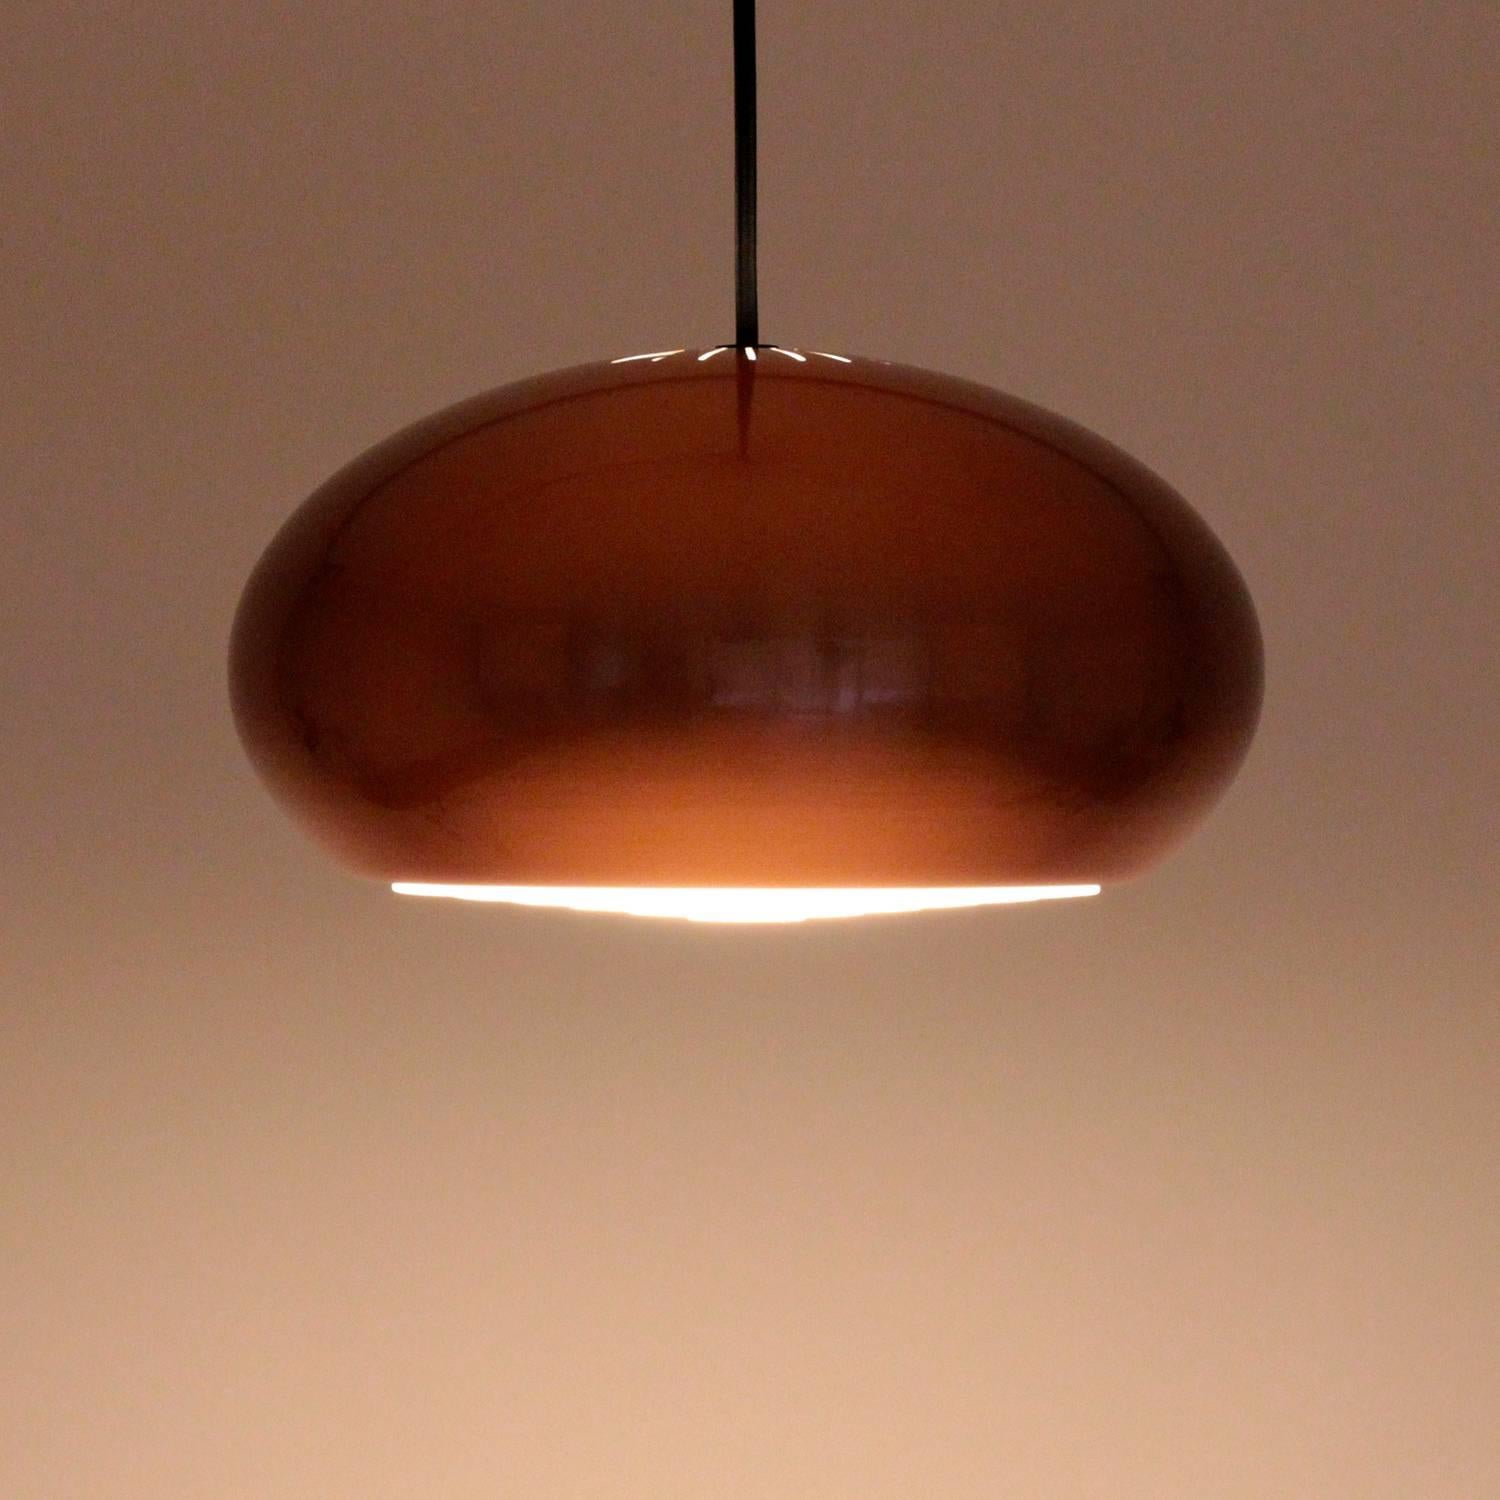 Medio, copper pendant light by Jo Hammerborg in 1966 for Fog & Mørup - gorgeous Spage Age design in rare near mint vintage condition!

A Space Age design piece with attractive dome shape and beautiful glistening copper surface. The inside